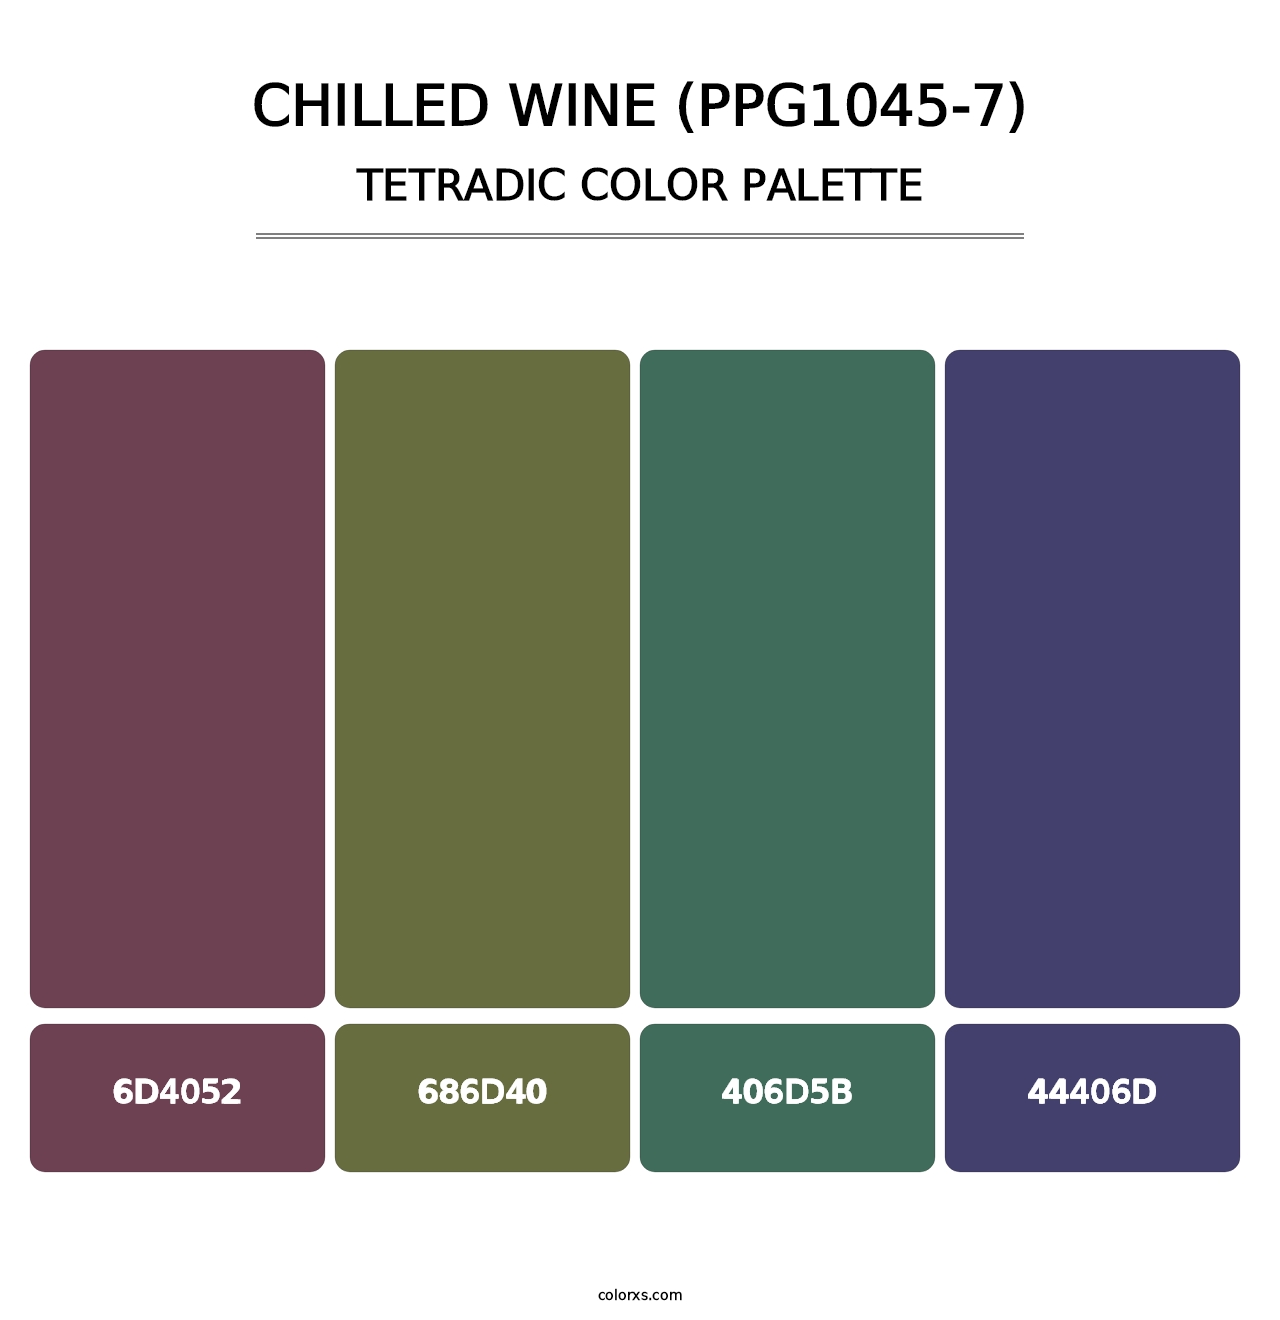 Chilled Wine (PPG1045-7) - Tetradic Color Palette